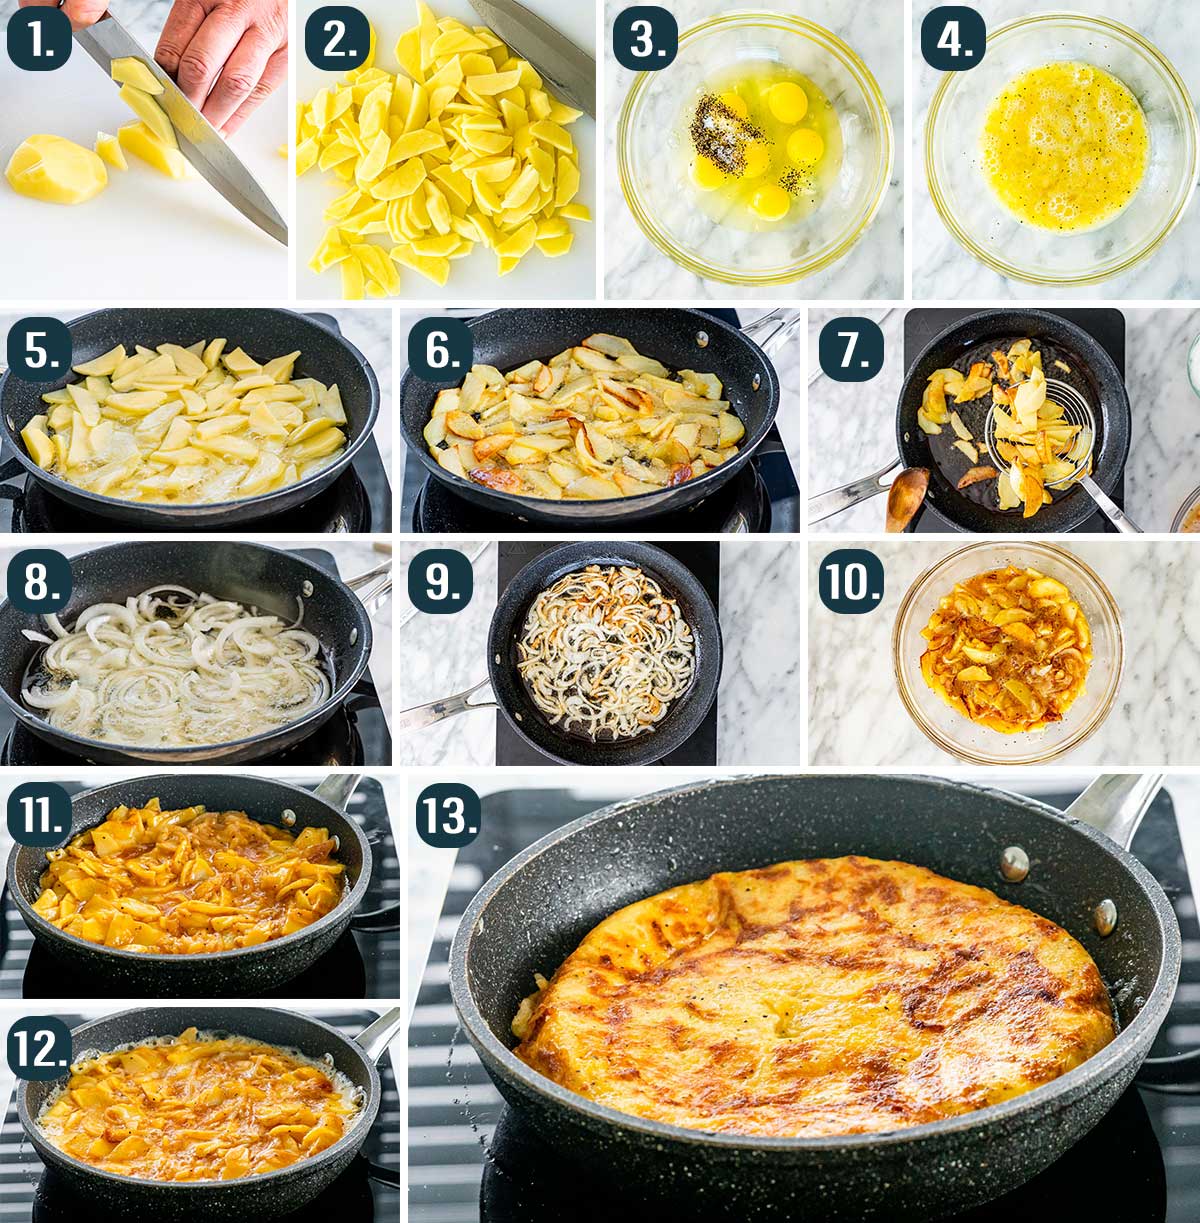 Detailed process shots showing how to make a Spanish omelette.